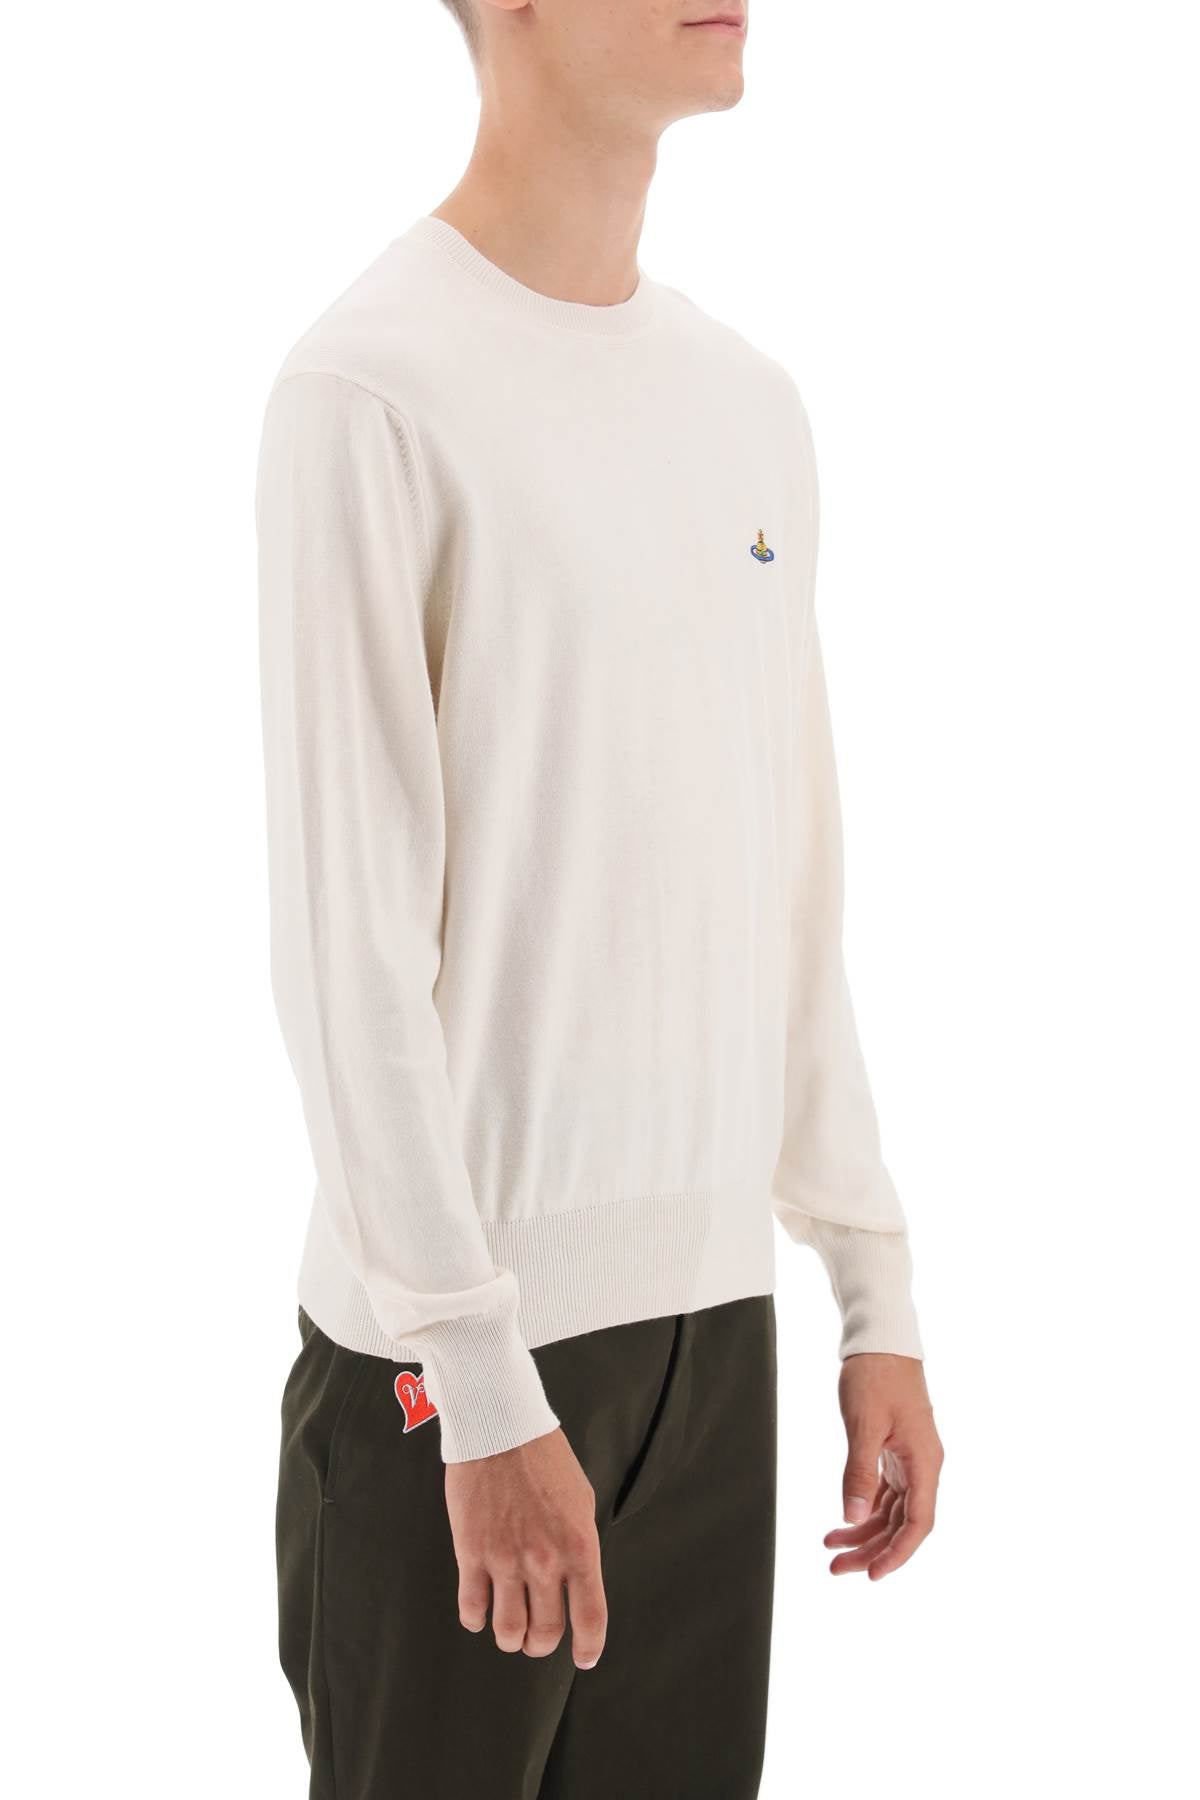 Vivienne westwood organic cotton and cashmere sweater